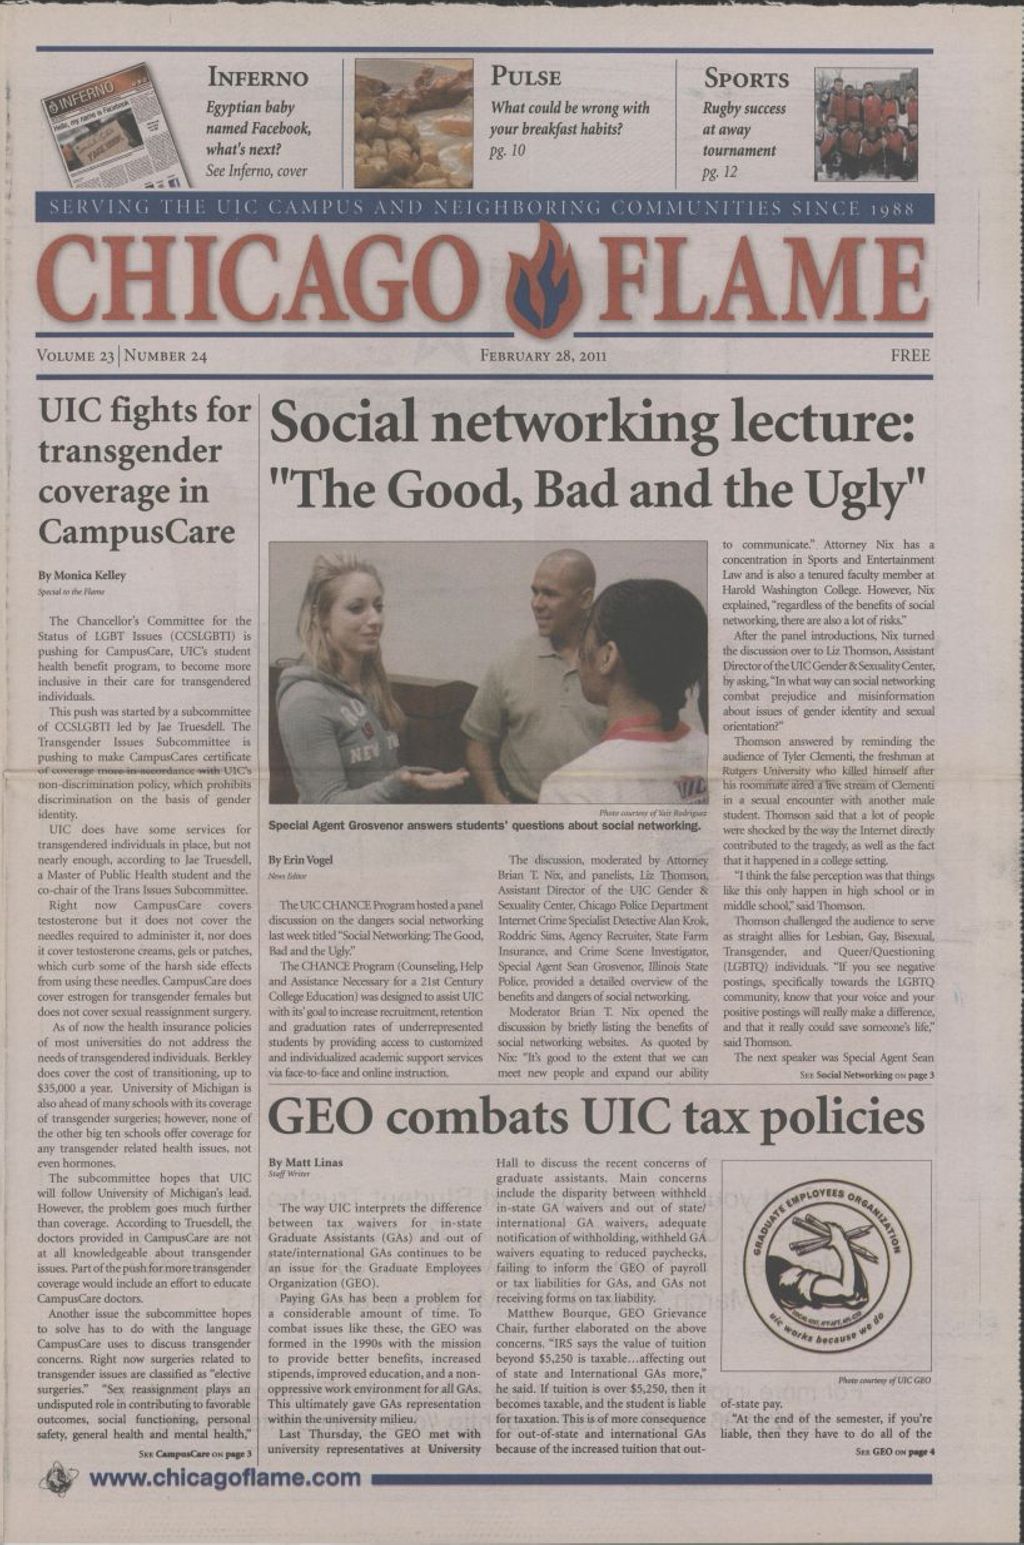 Chicago Flame (February 28, 2011)